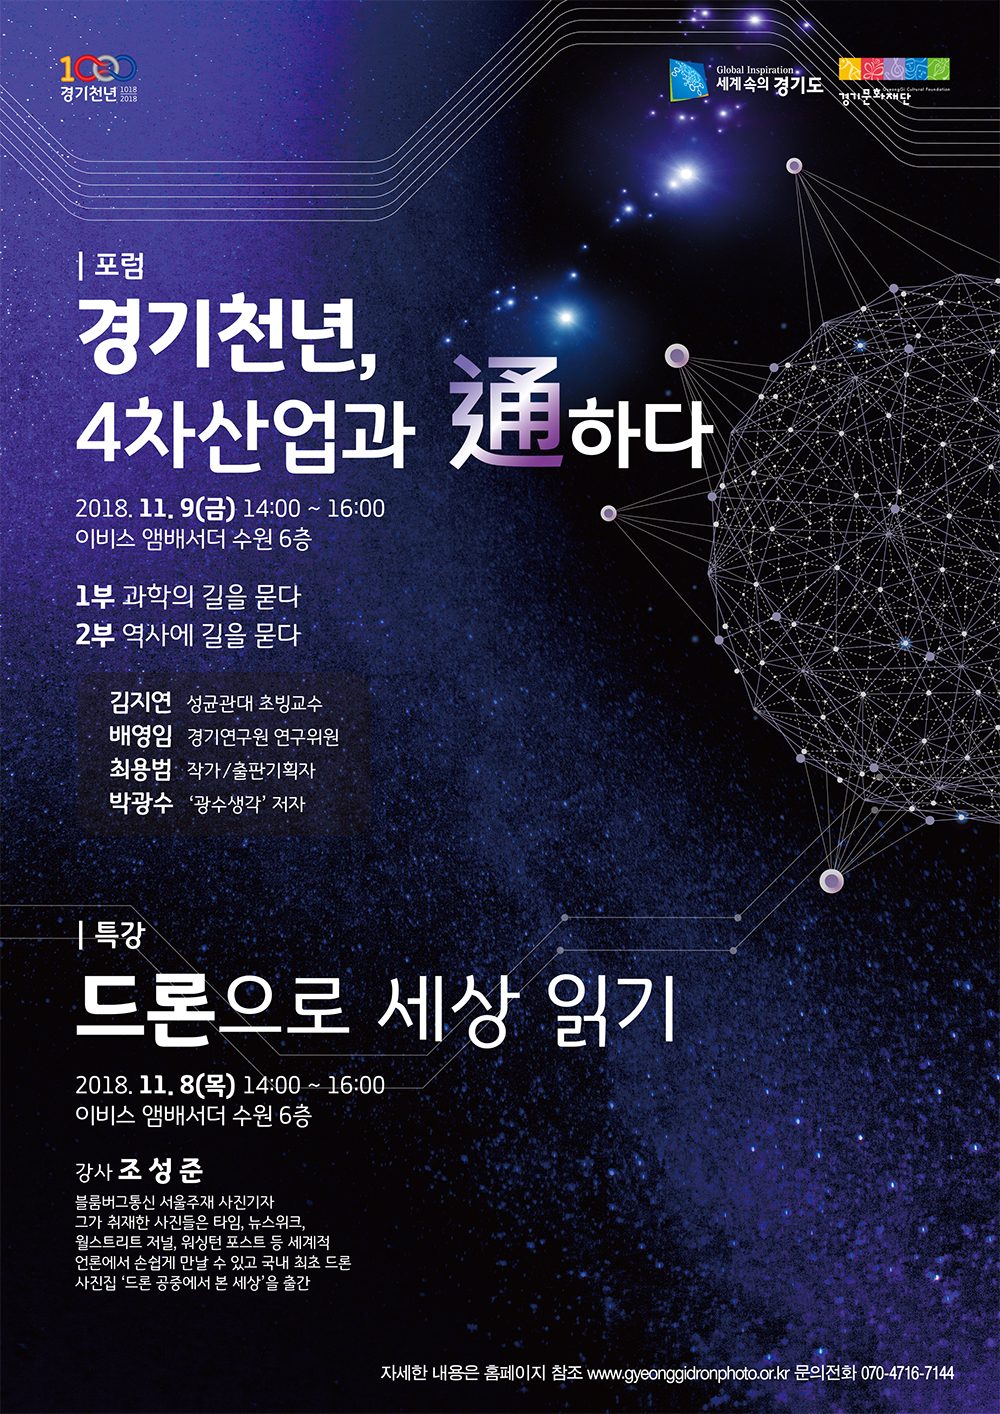 Gyeonggi Millennium, Communicating with the 4th Industry Forum